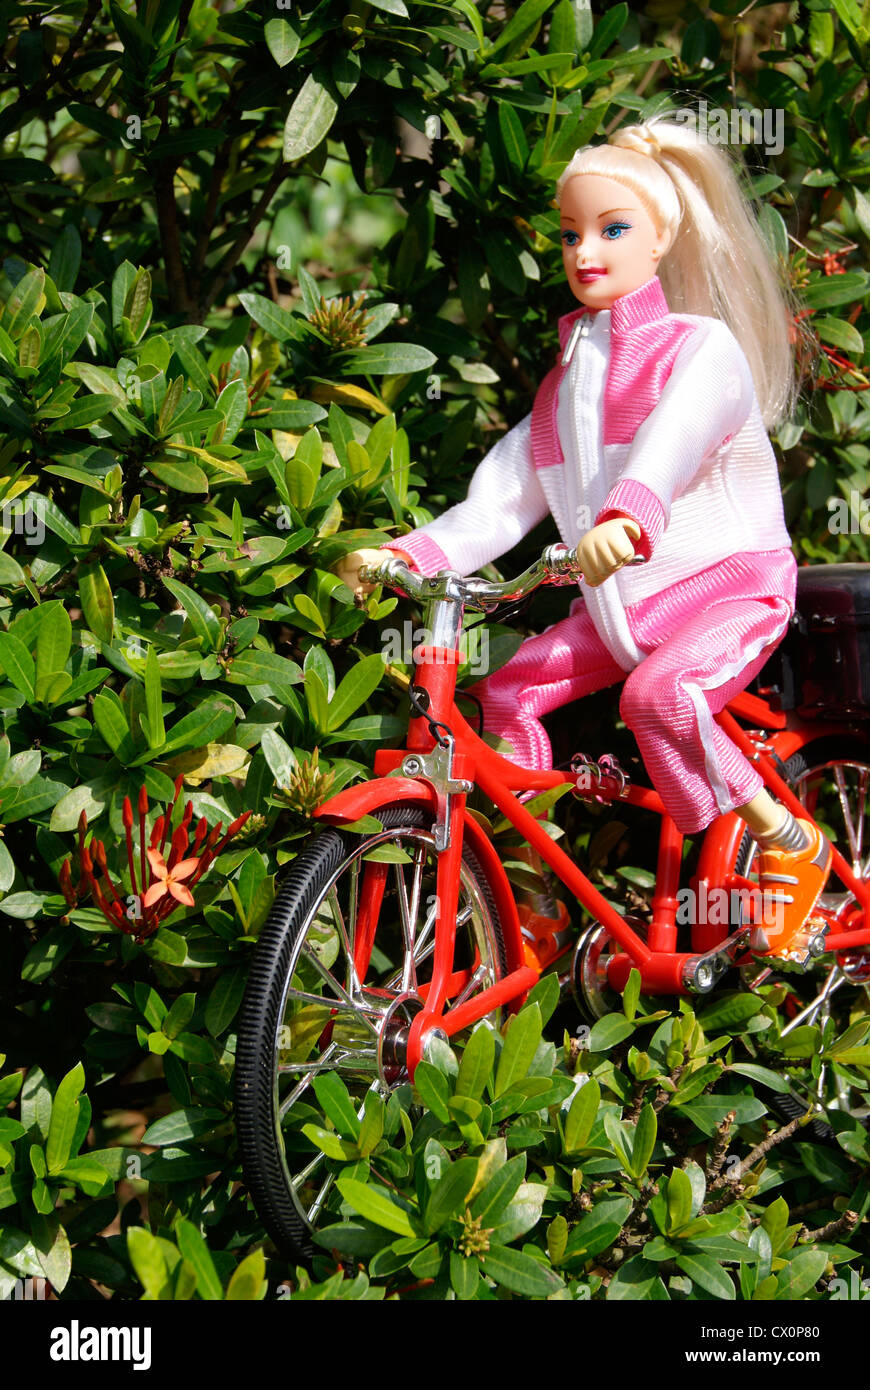 Doll Girl Barbie Riding cycle.Bicycle riding toy Front and side view Stock Photo